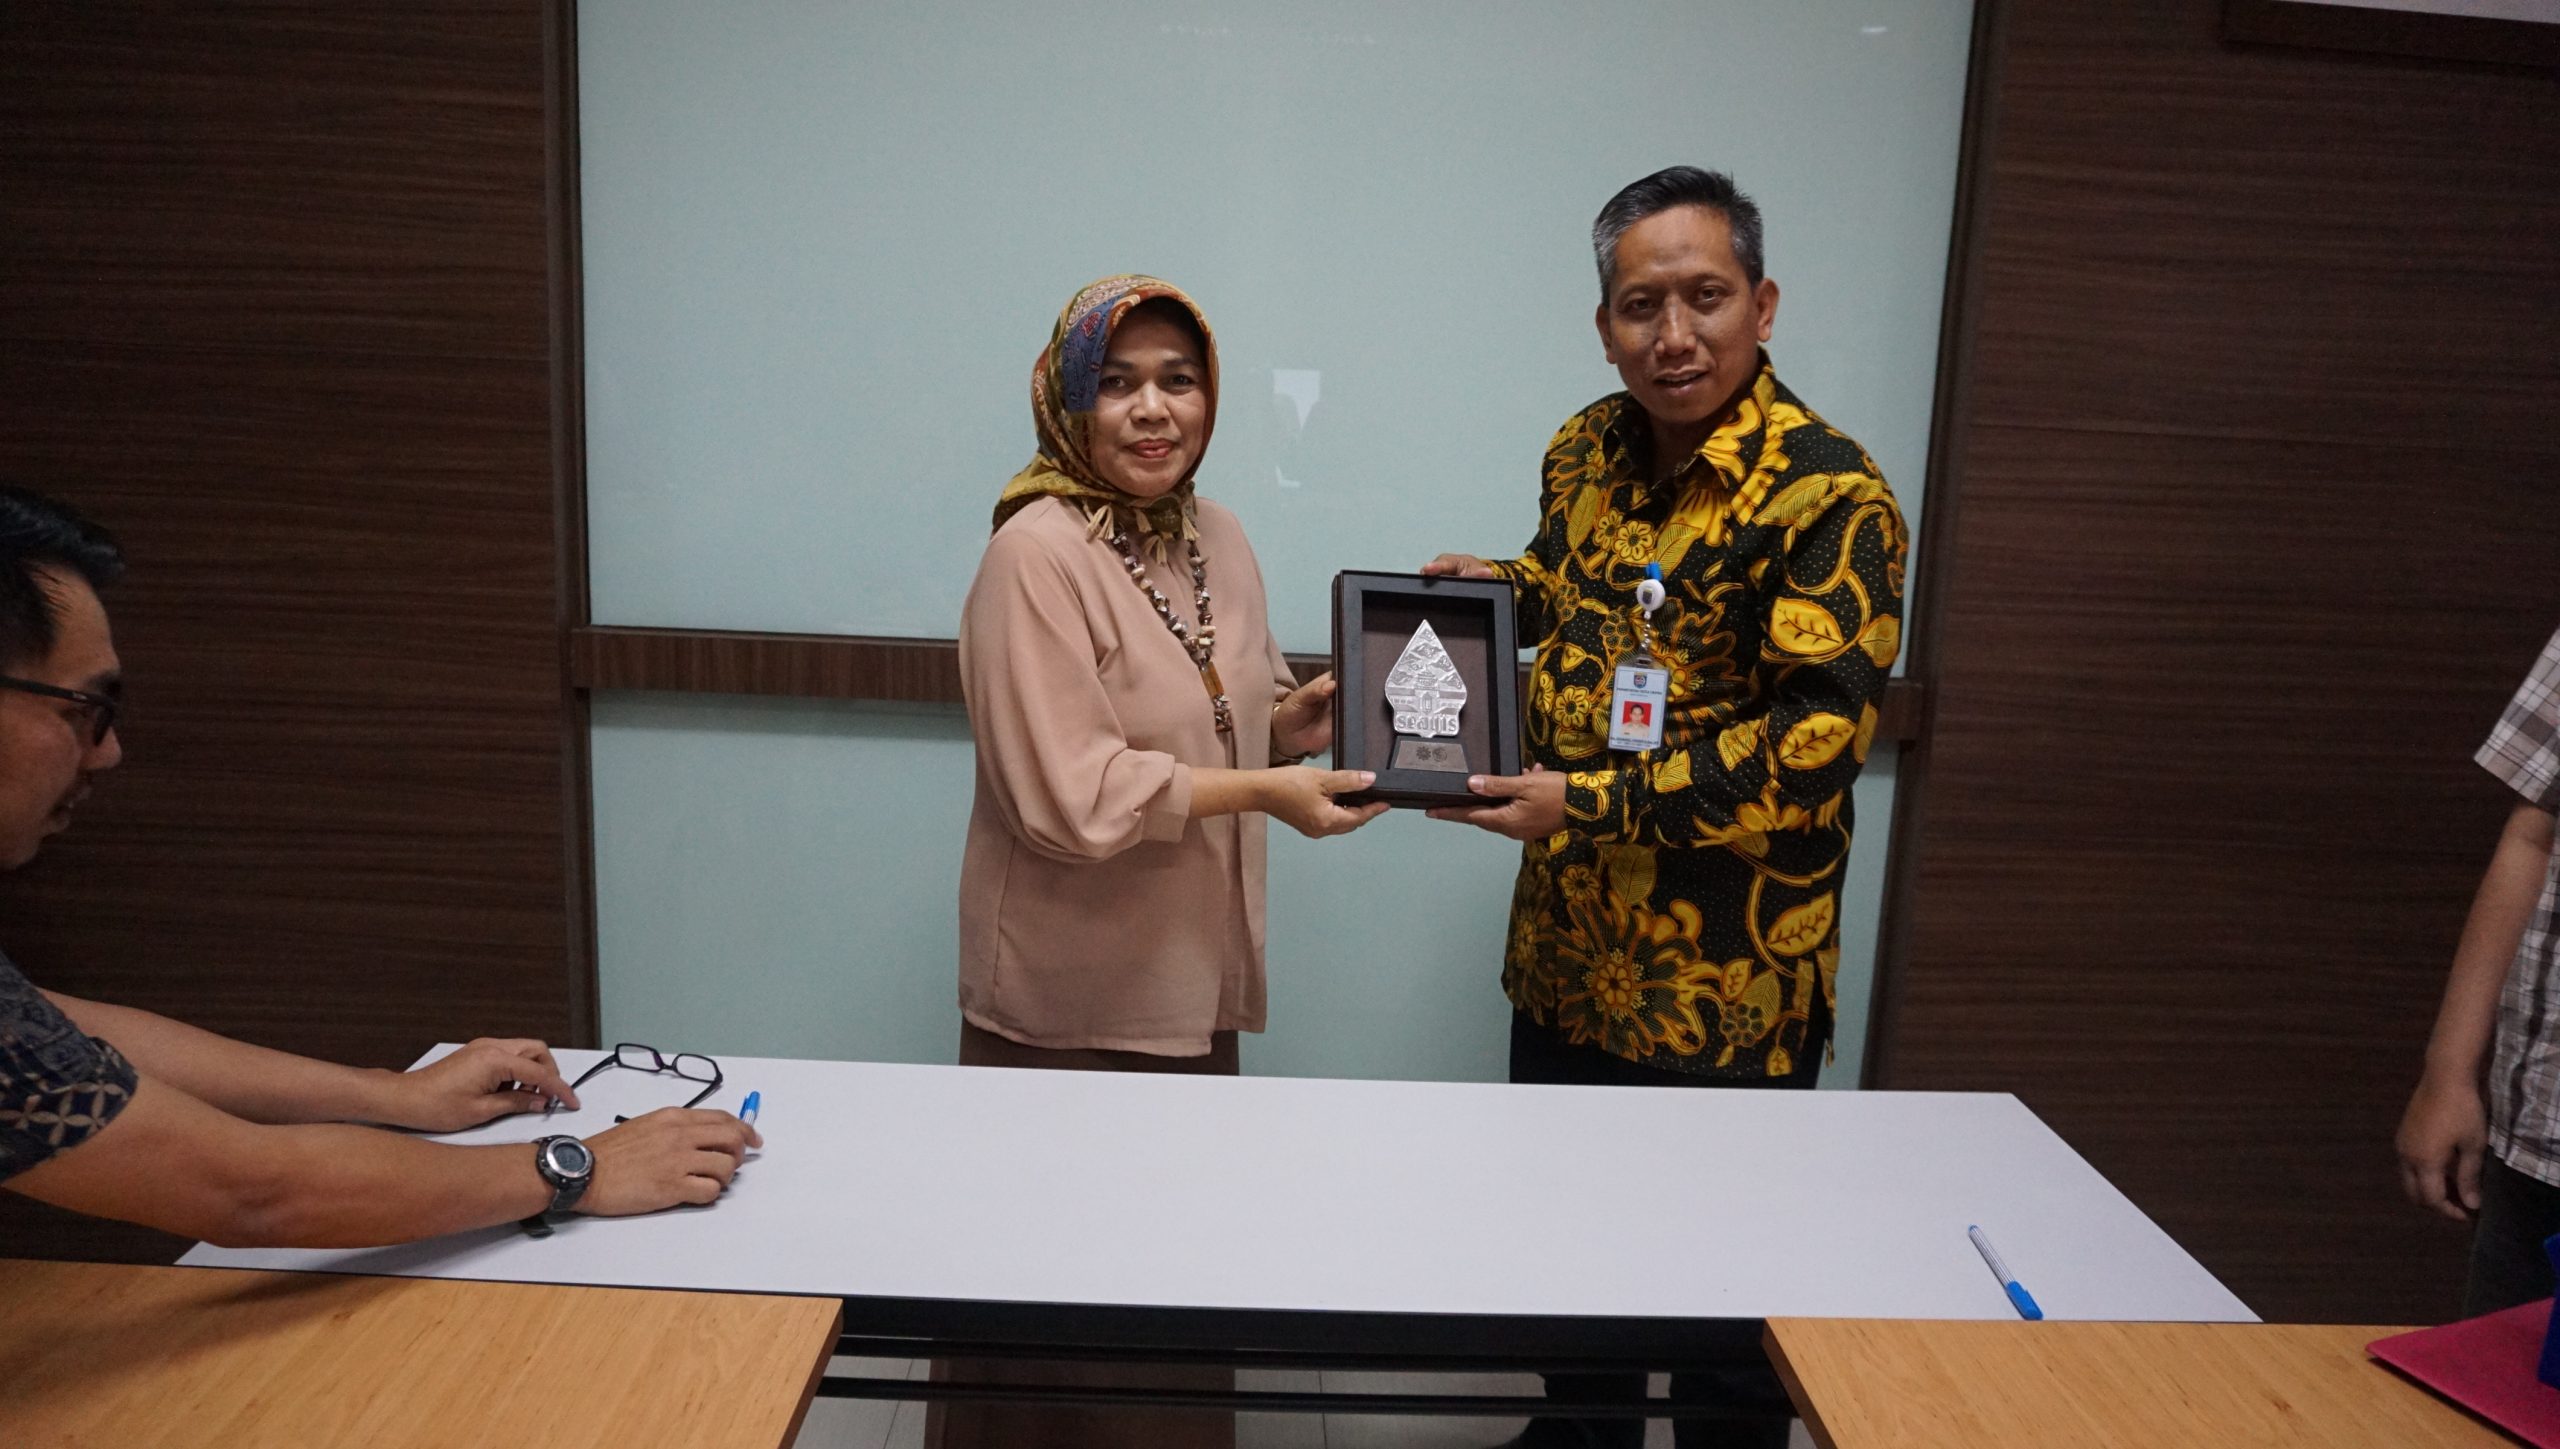 MoU signing with the Education Office of Depok City